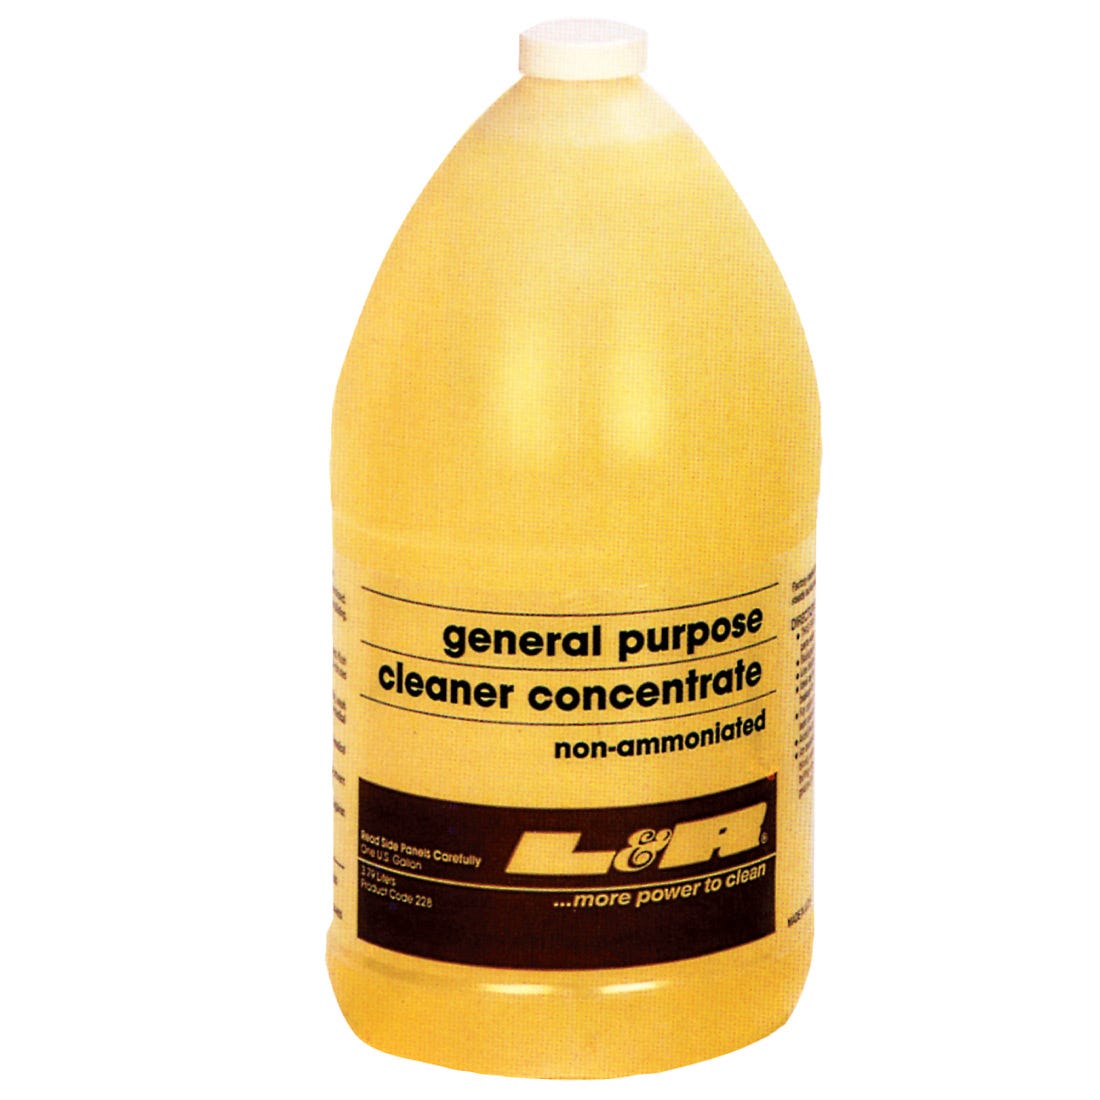 Ultrasonic General Purpose Cleaner Concentrate (non-ammoniated)